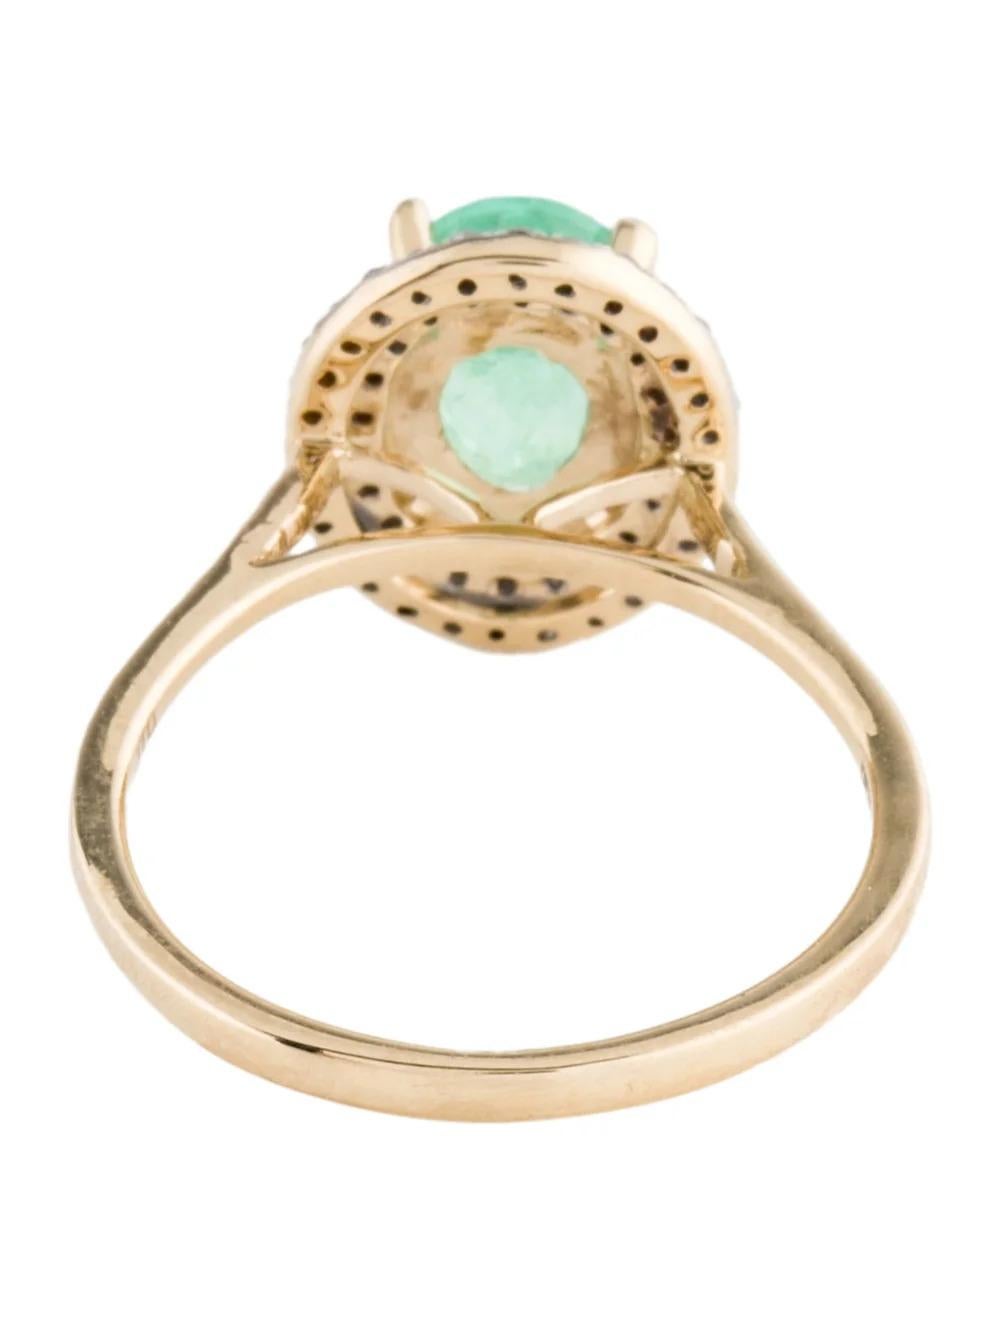 14K Emerald & Diamond Cocktail Ring 1.51ctw, Size 6.5 - Statement Jewelry In New Condition For Sale In Holtsville, NY